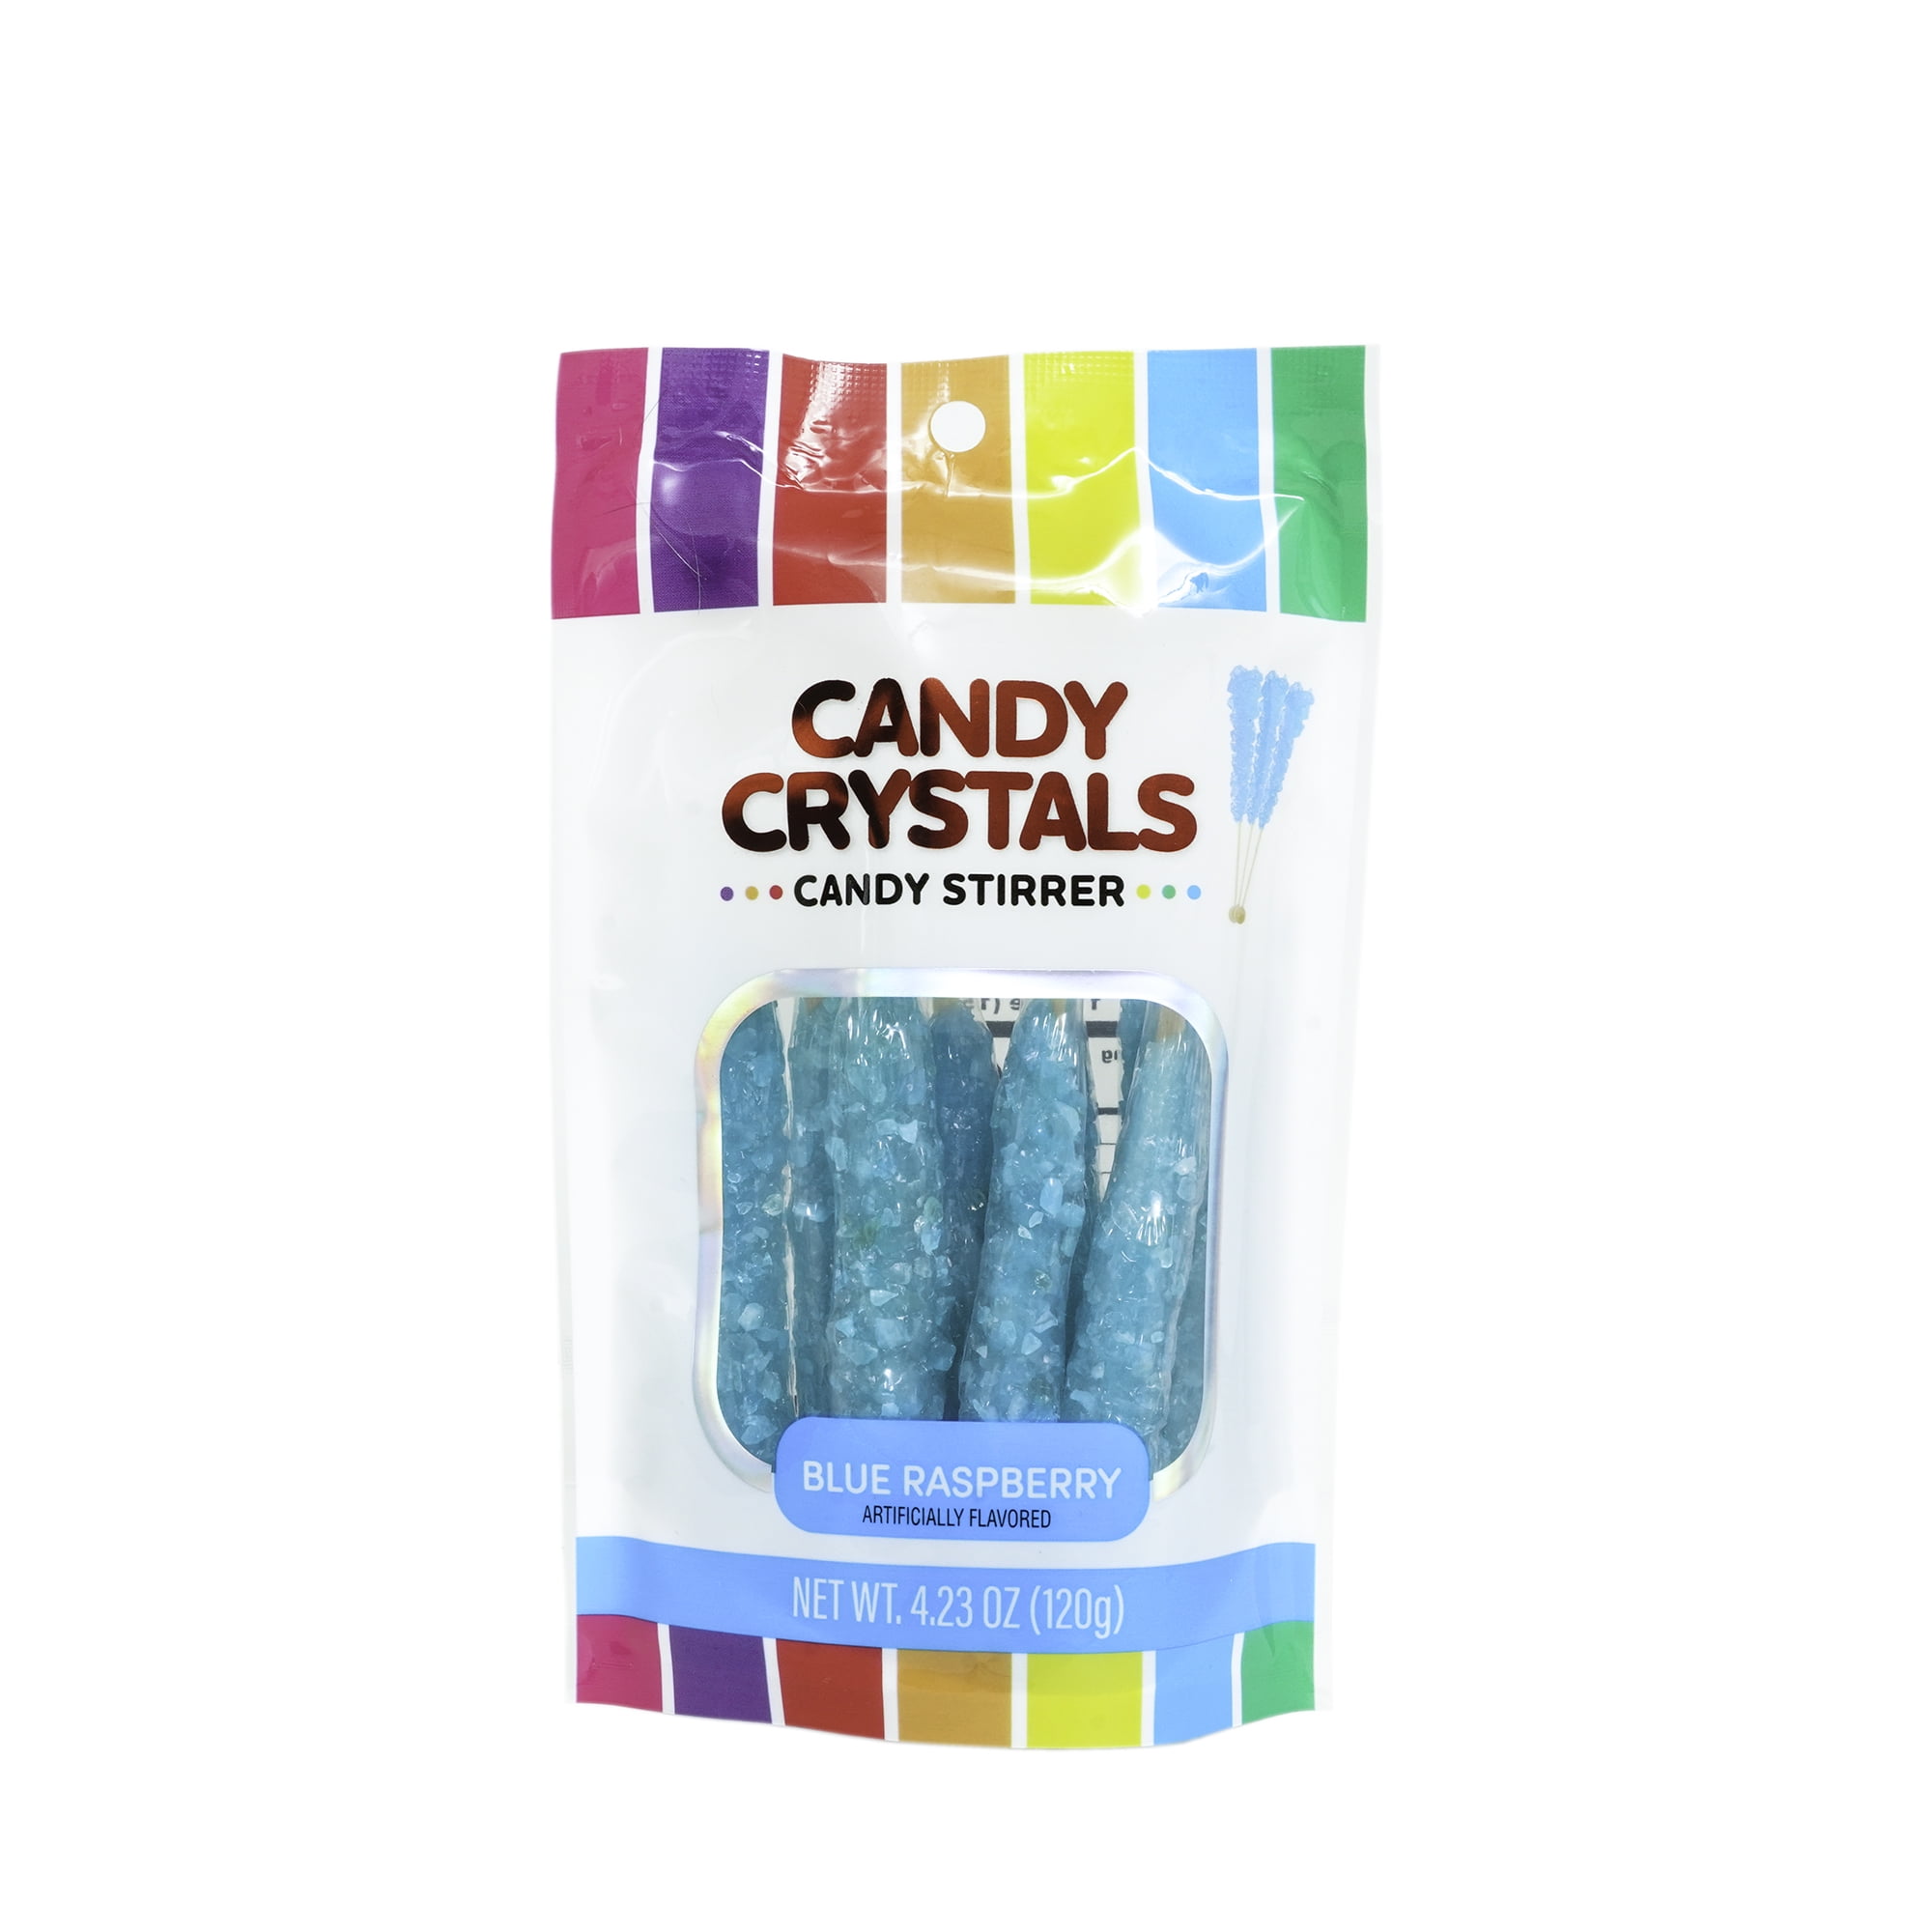 Hilco Candy Crystals Blue Raspberry Flavored Blue Candy Stirrers, 4.23 oz, 8 Pack